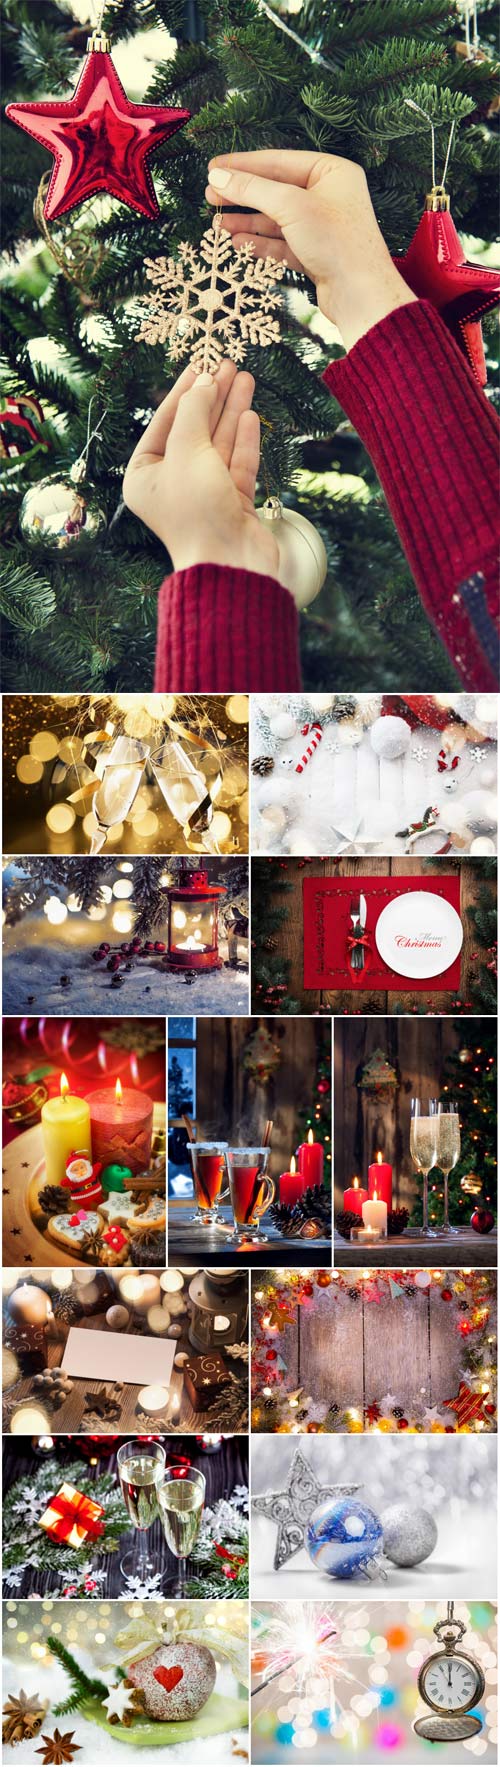 New Year and Christmas stock photos №58